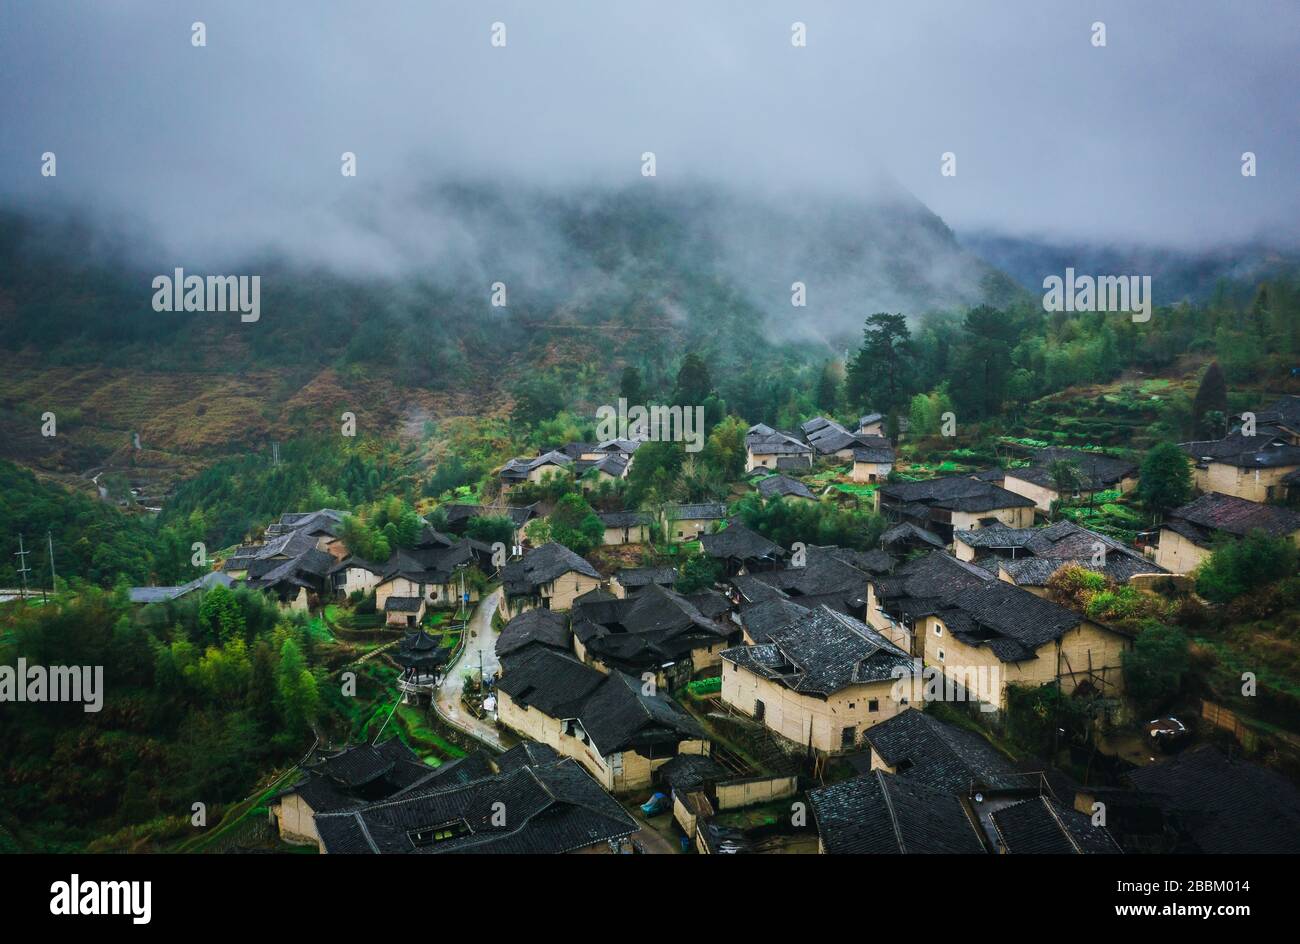 Countryside candscape of China's traditional and historic village Stock Photo